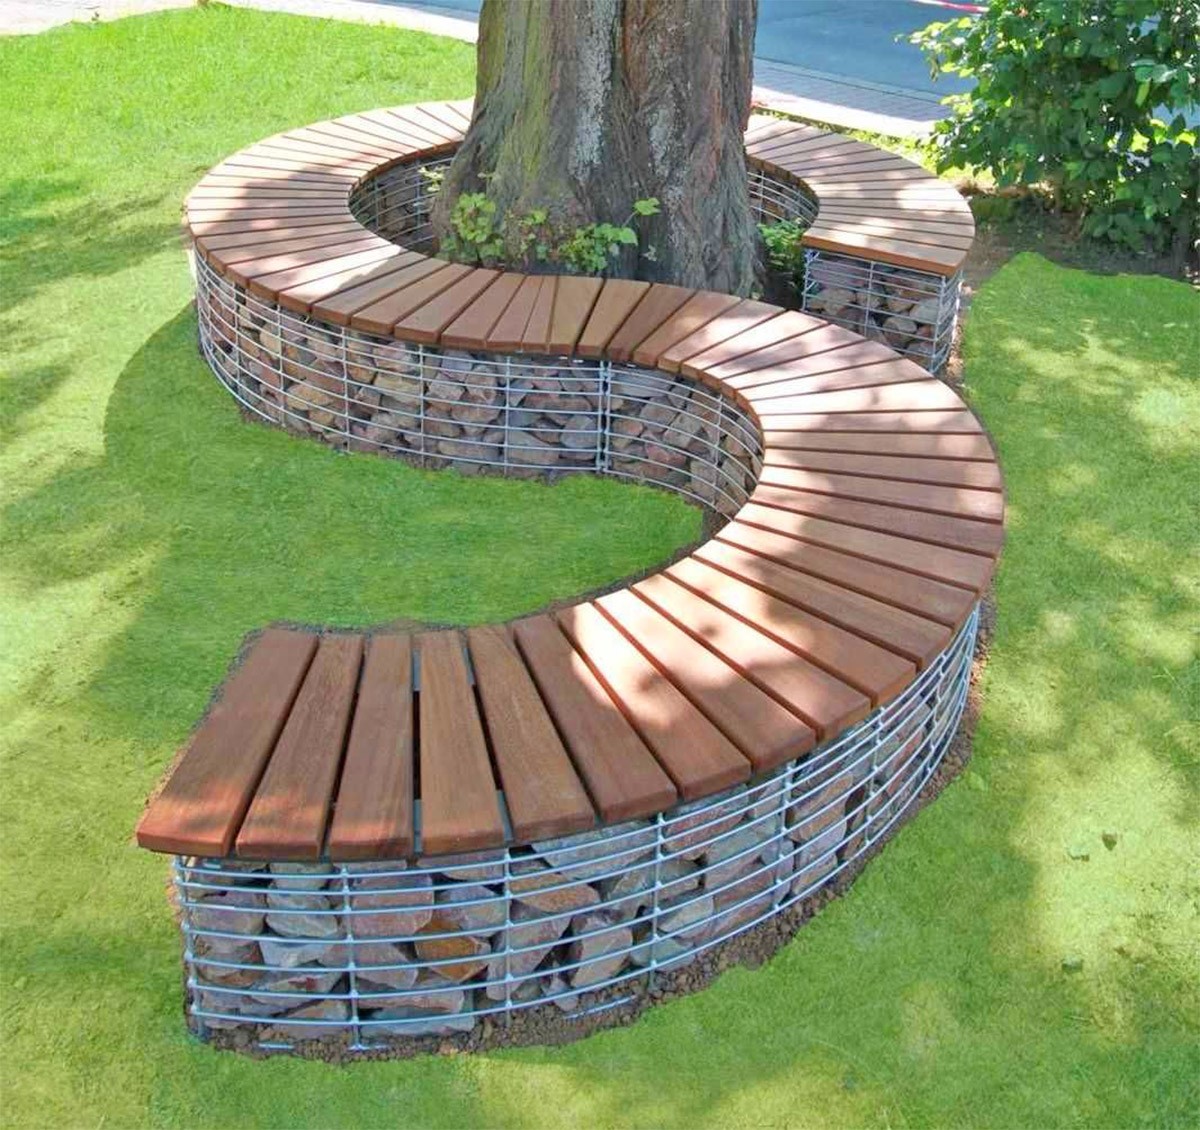 These wrap around tree benches provide beautiful outdoor